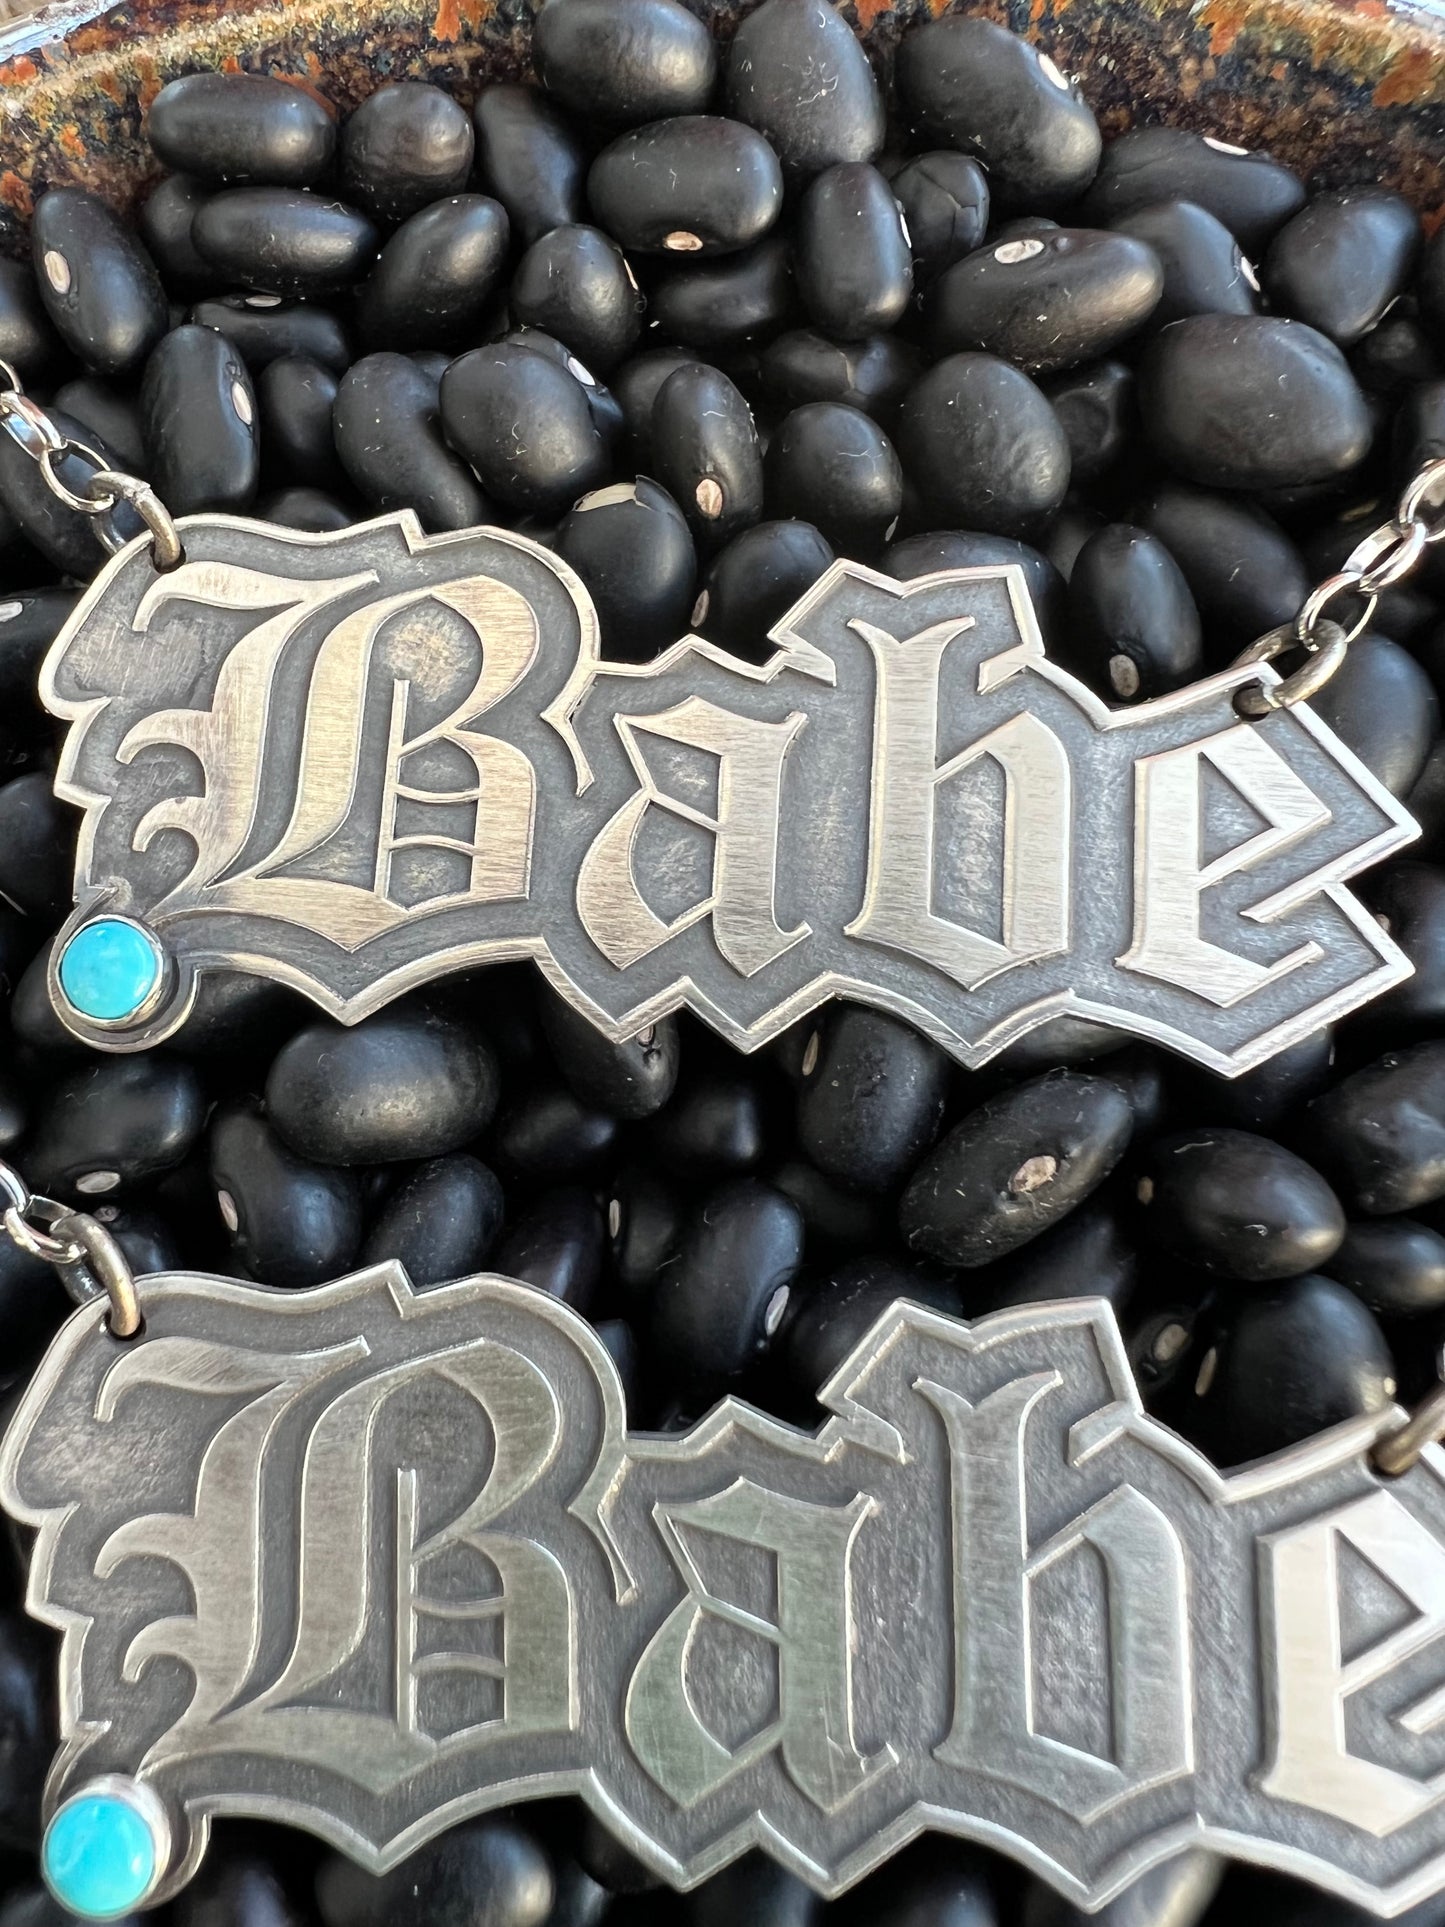 Babe necklace nameplate 18” sterling silver